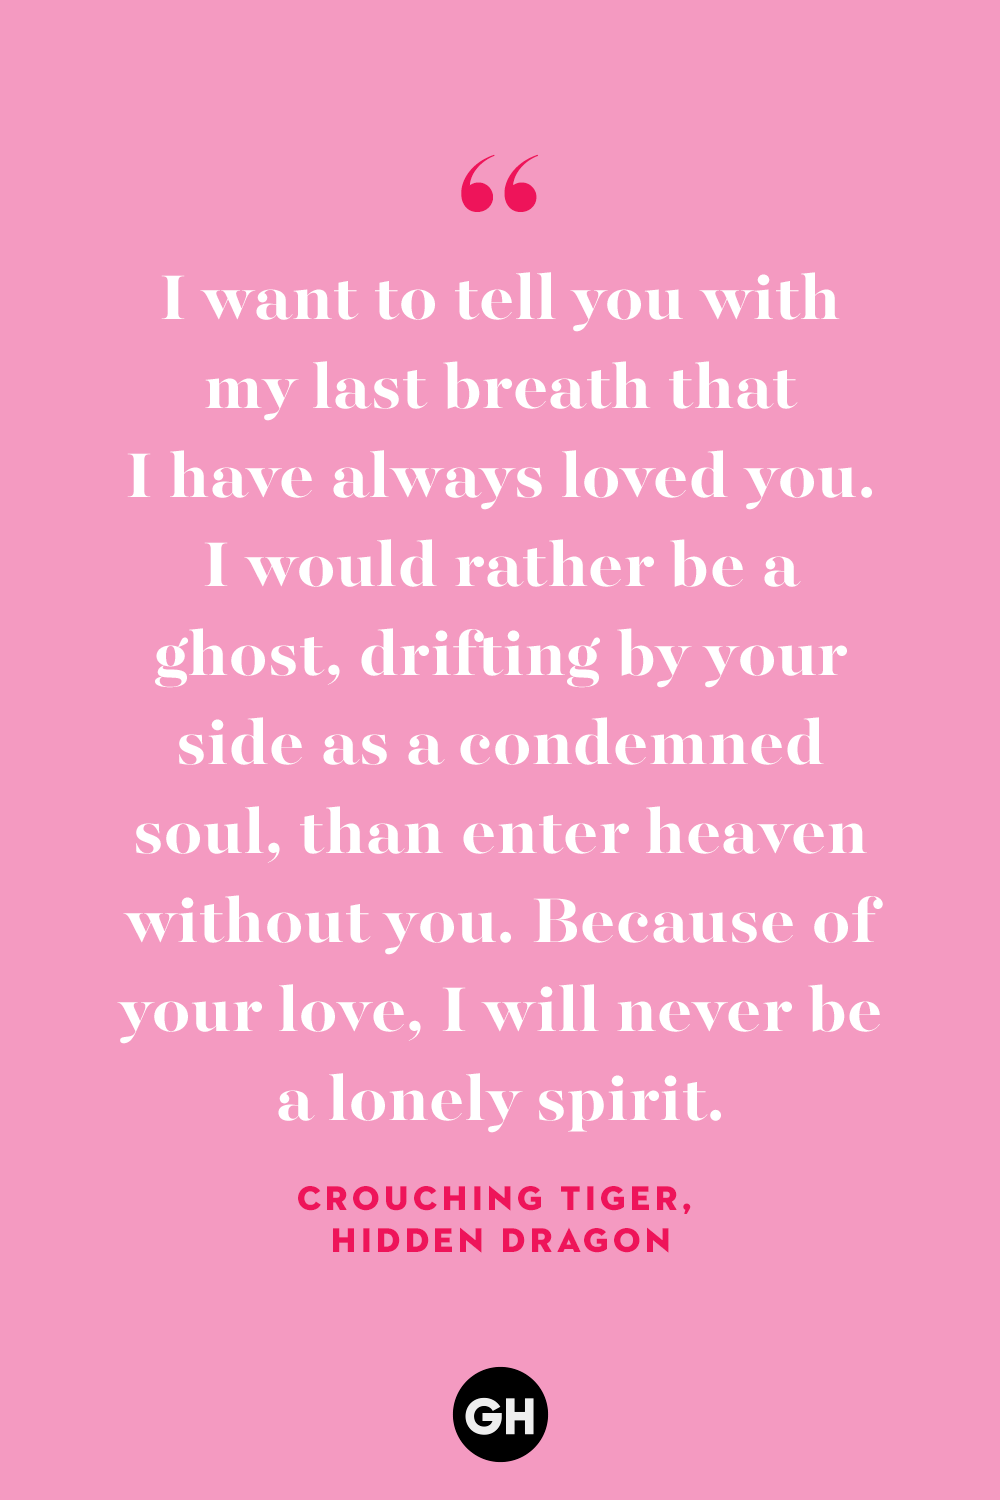 40 Best Love Quotes Romantic Sayings For Him